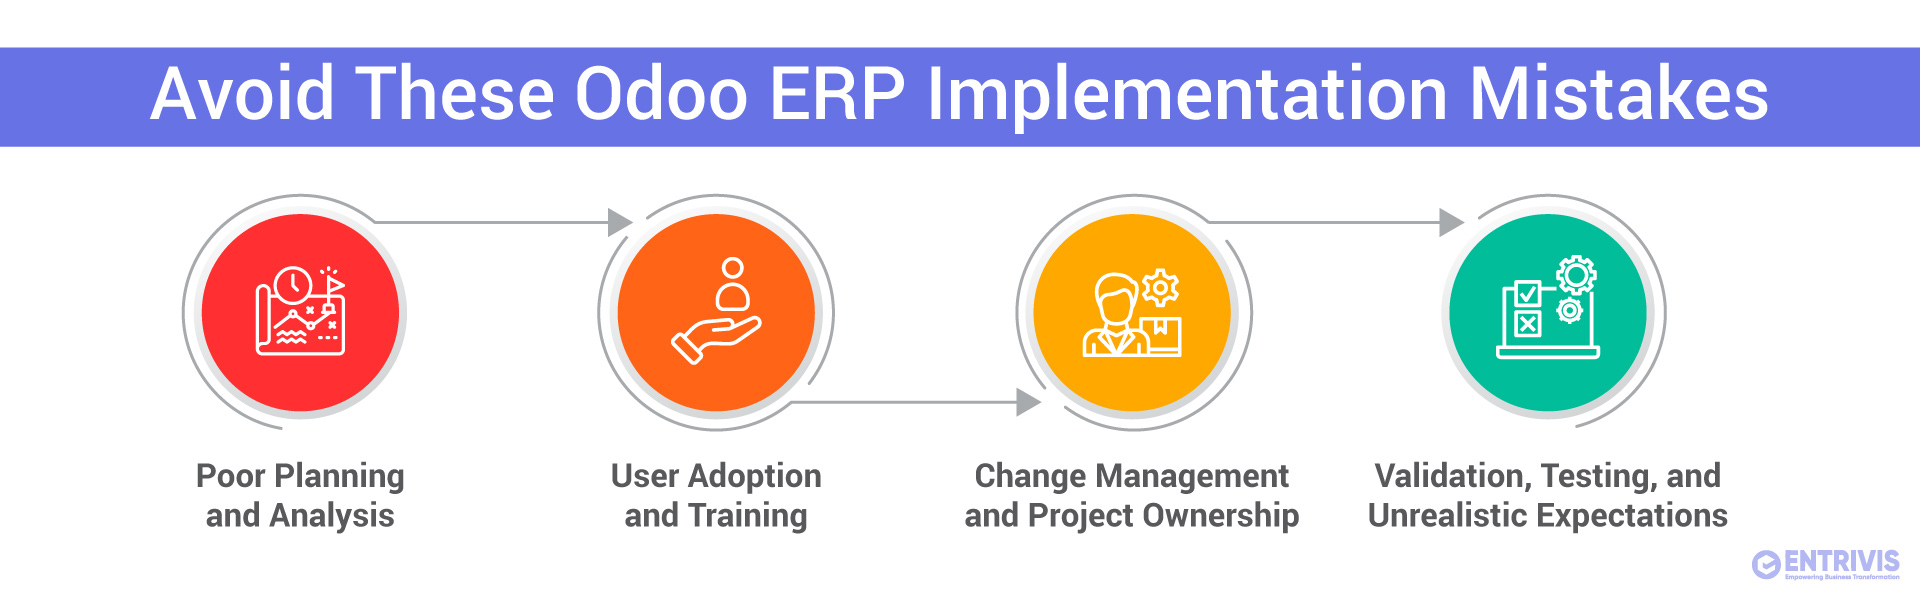 Odoo ERP Implementation Mistakes